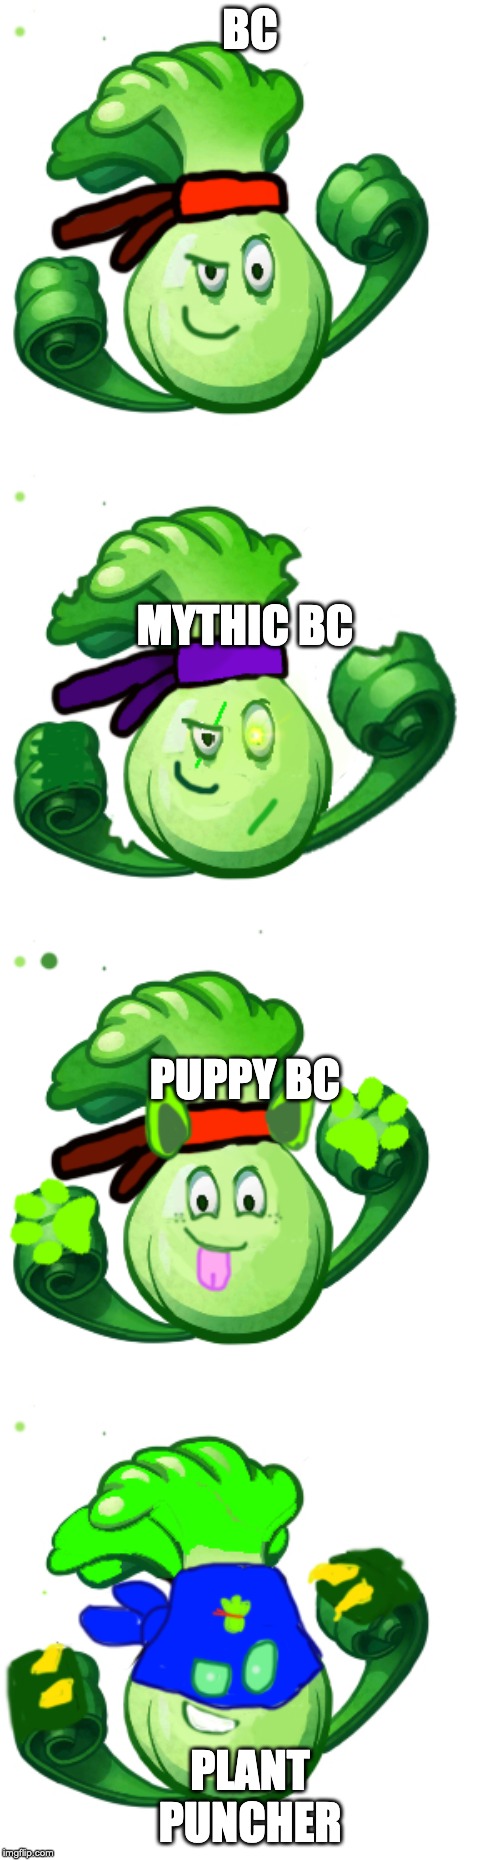 choose who you'll be fighting! | BC; MYTHIC BC; PUPPY BC; PLANT PUNCHER | made w/ Imgflip meme maker